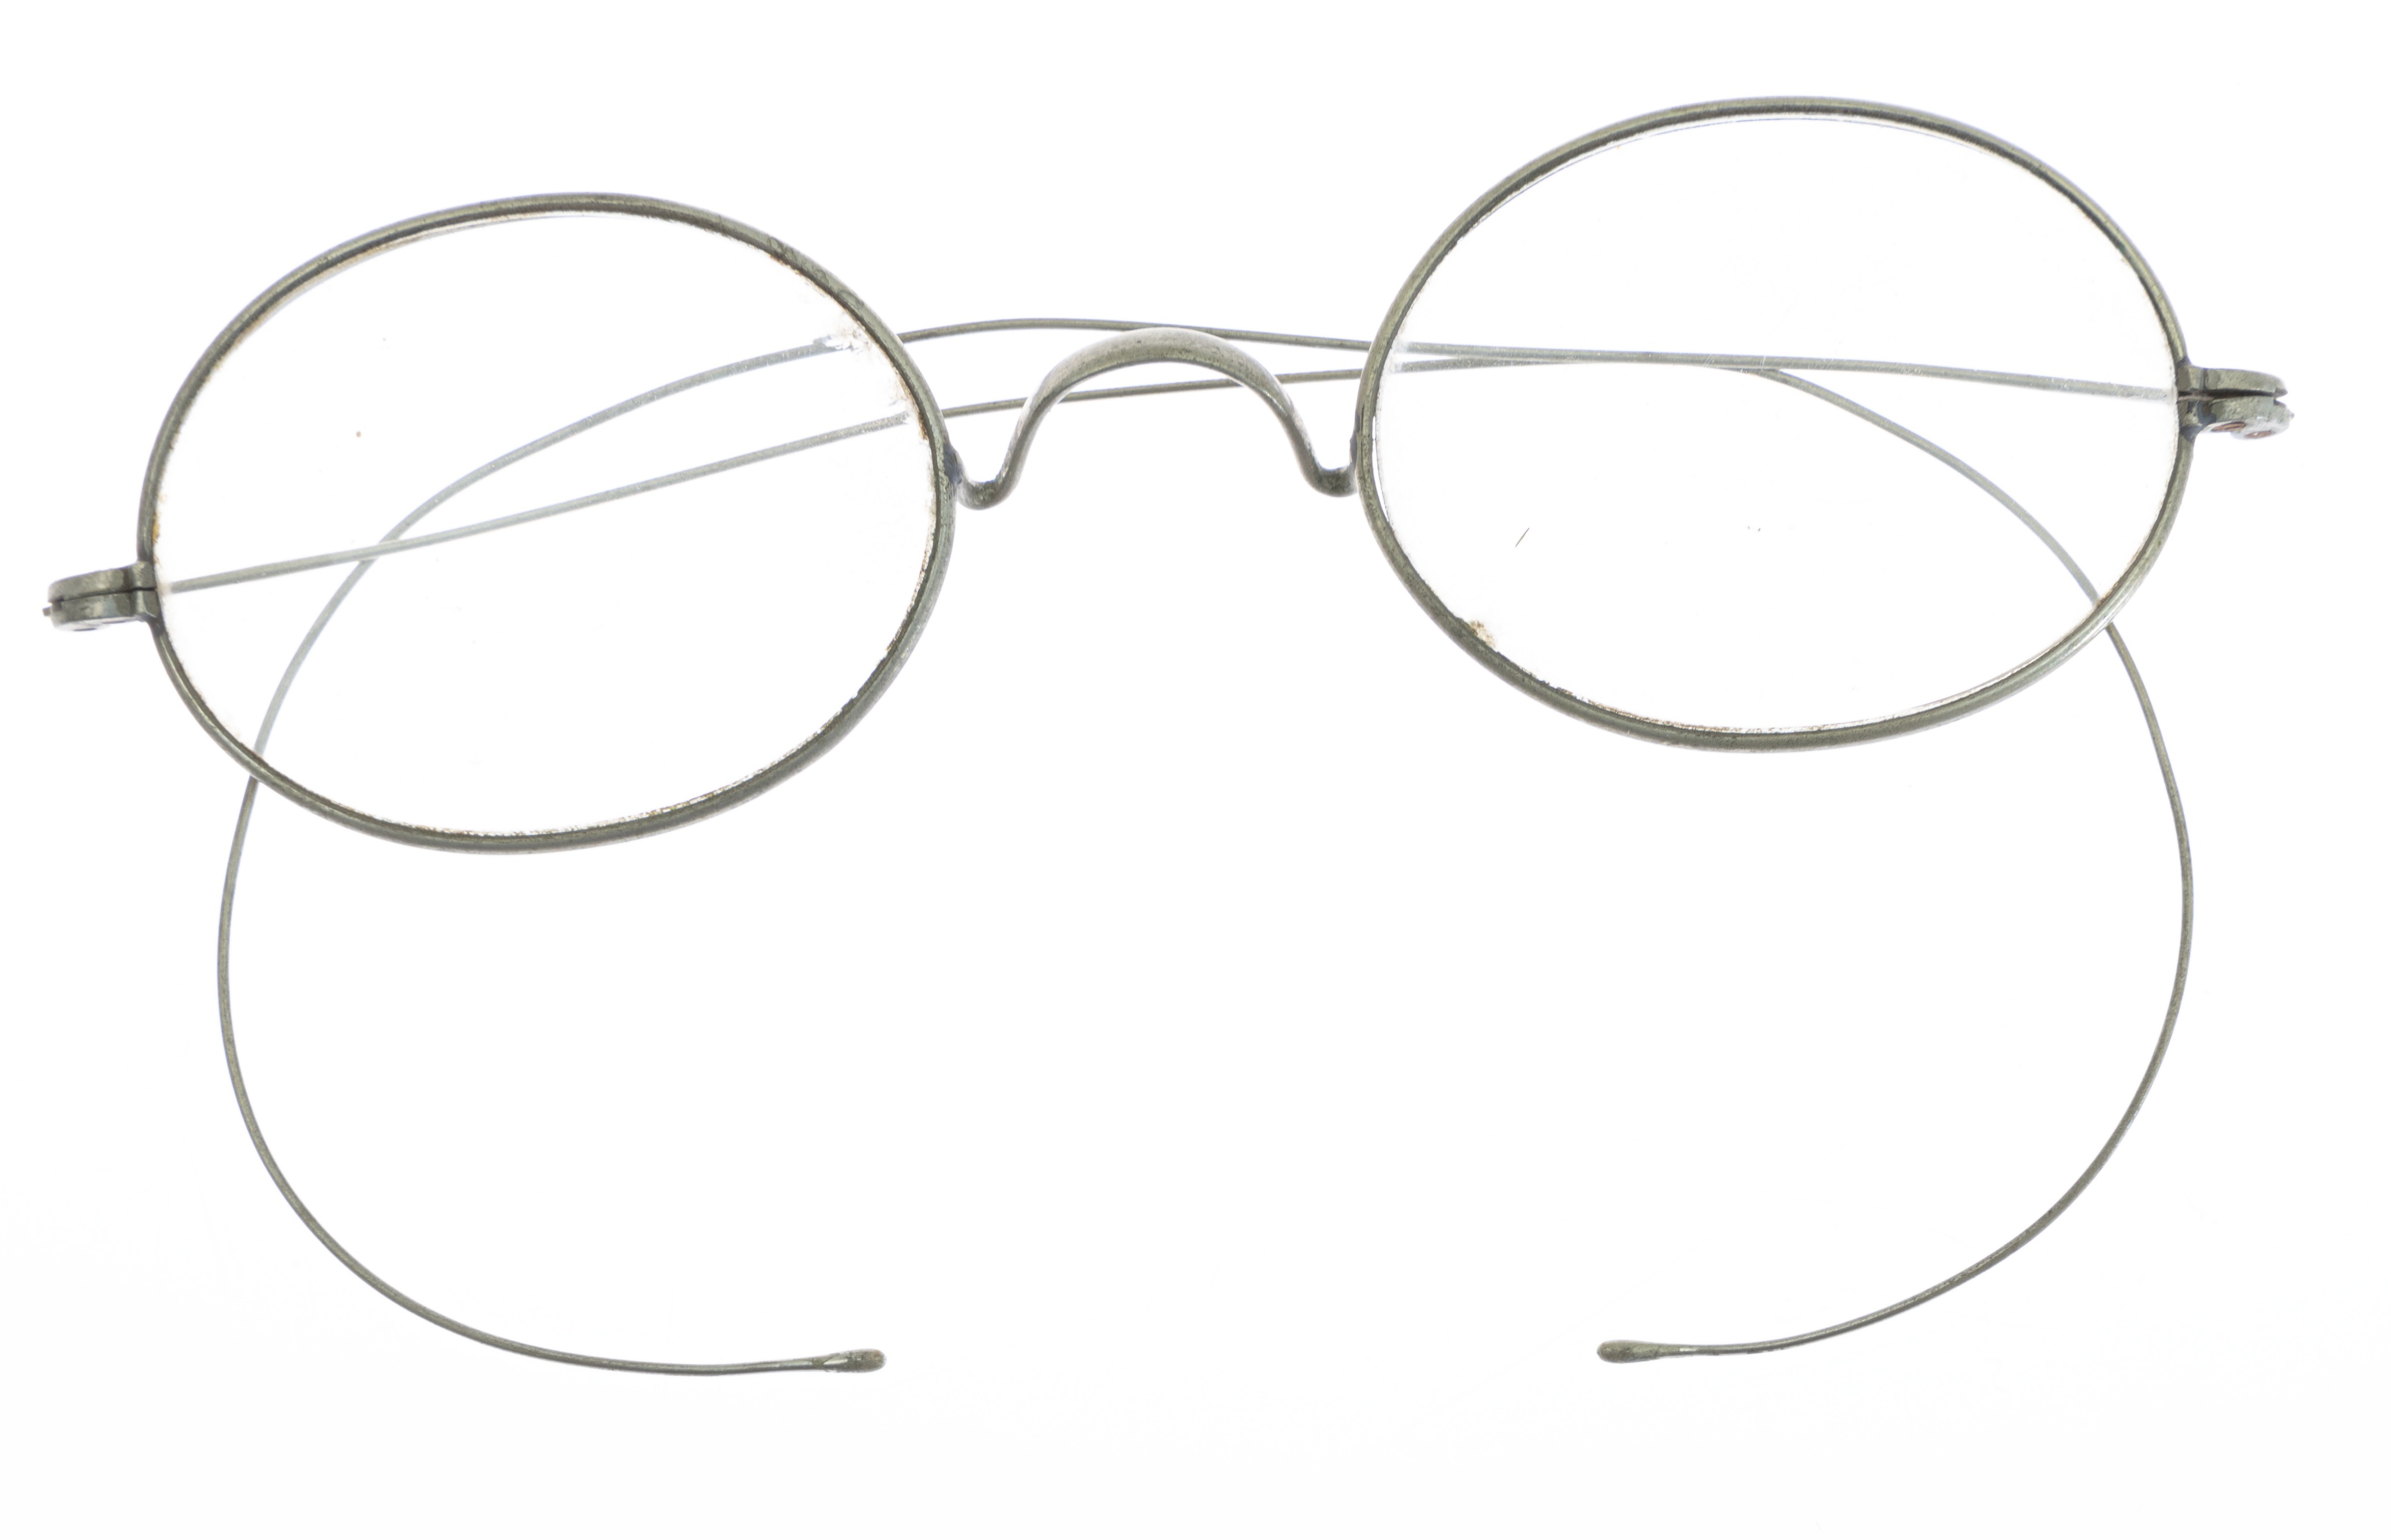 Simple wire-rim glasses from the nineteenth century.